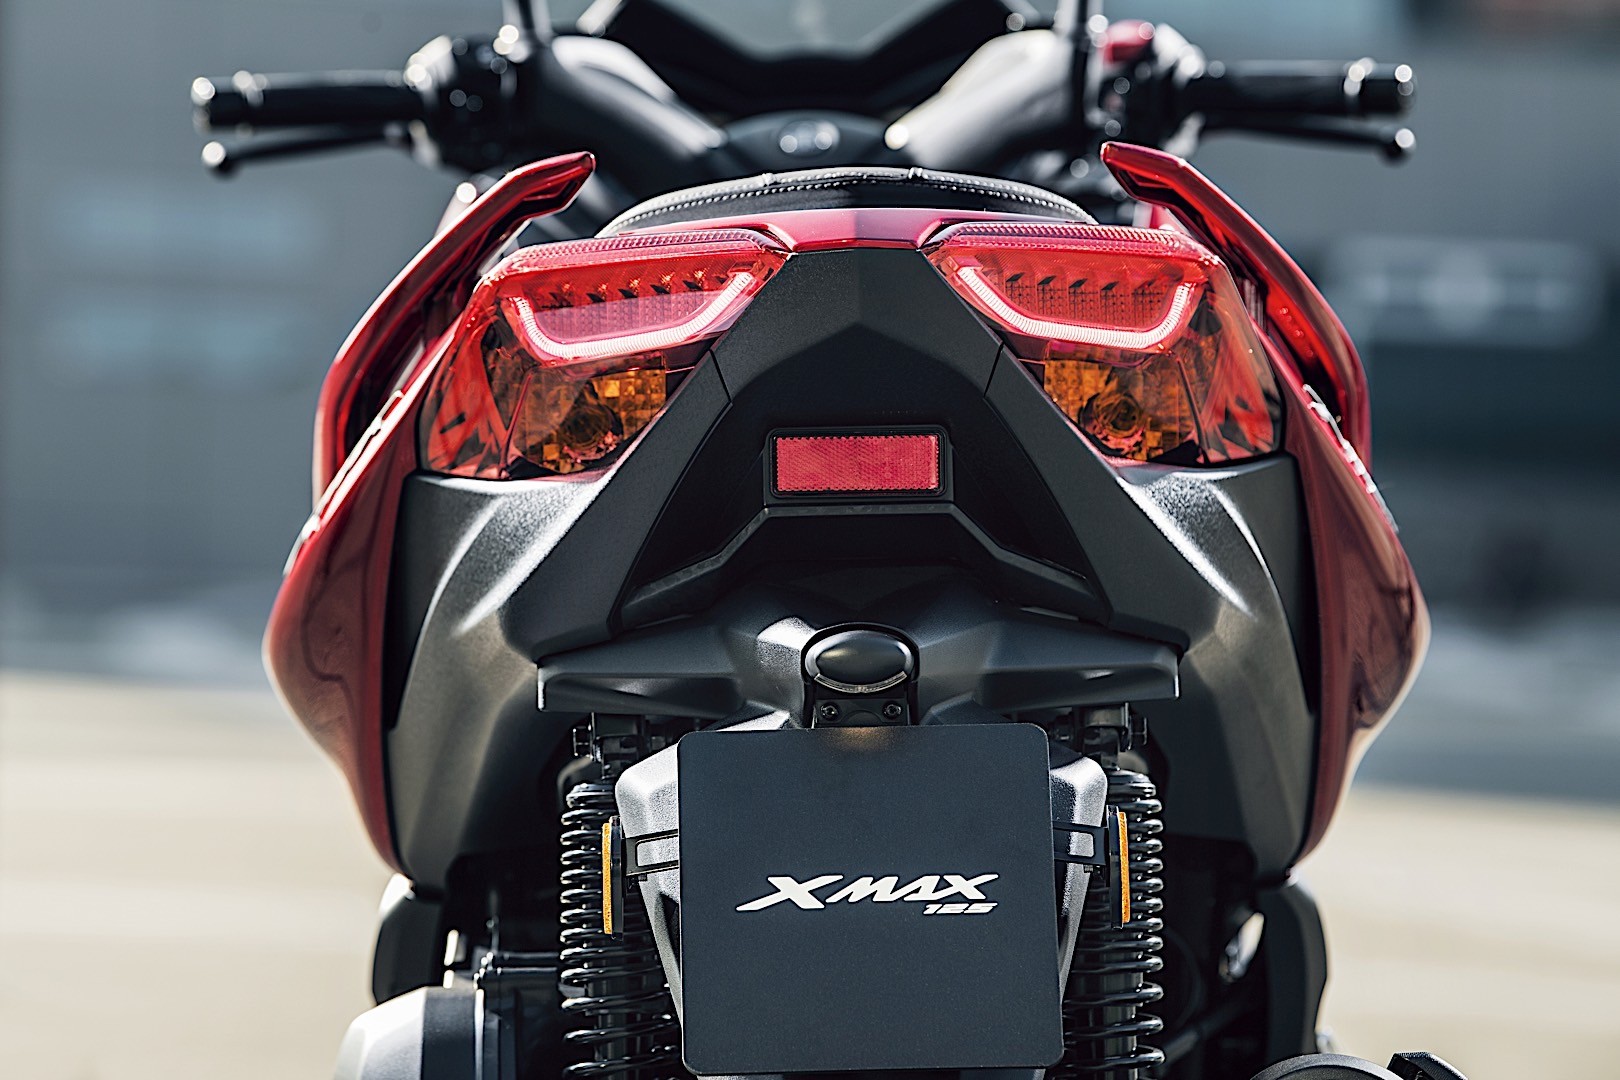 2019 Yamaha X  MAX  125 Is Here For Every City Dweller 